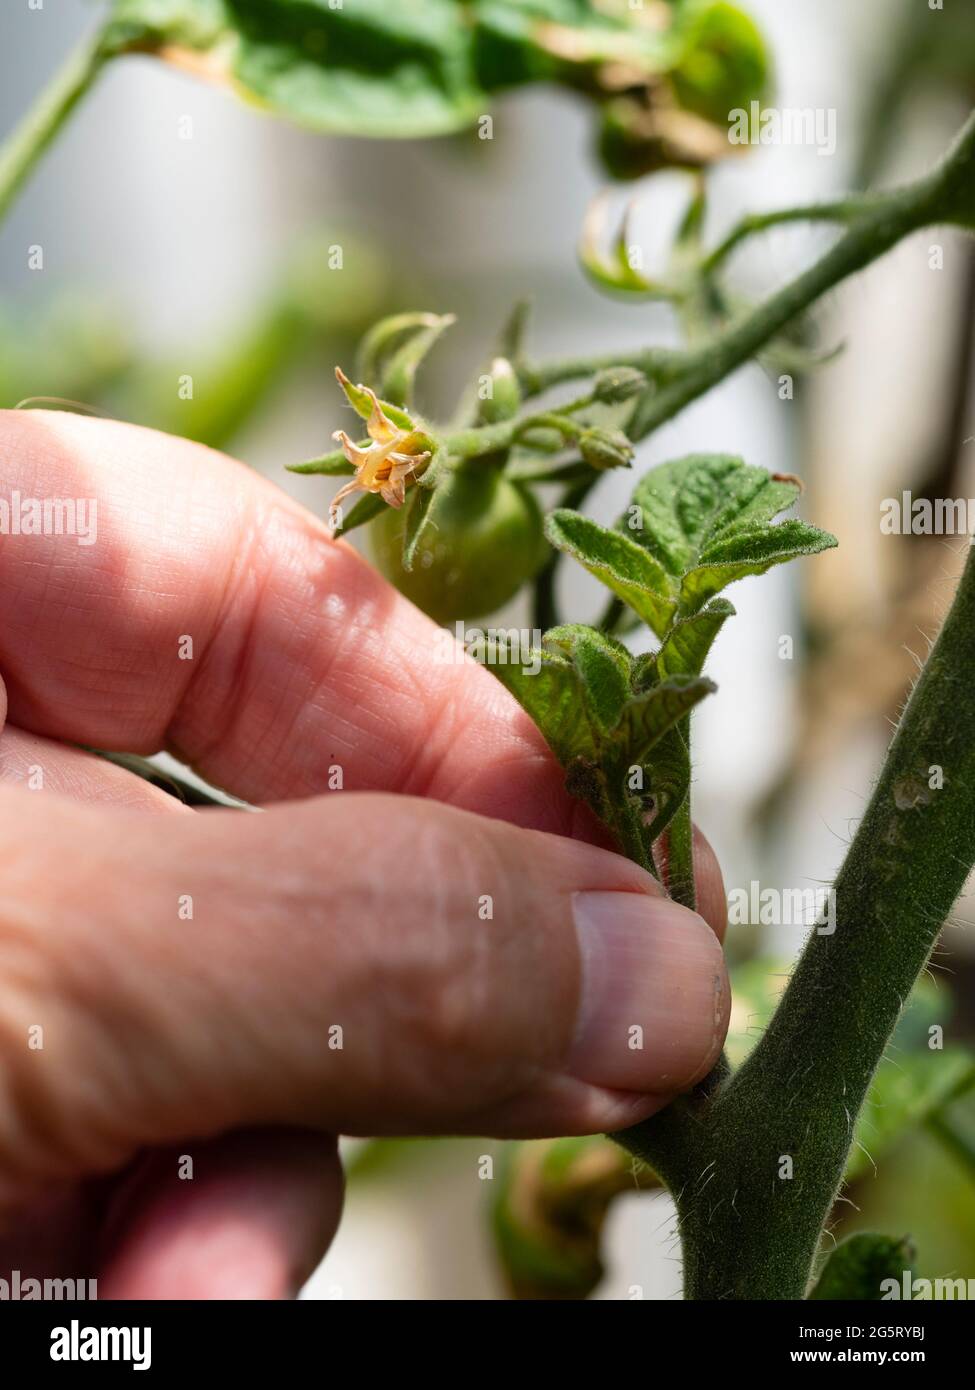 Preparing to remove the side shoot of the indeterminate cordon tomato Solanum lycopersicum 'Outdoor Girl' Stock Photo